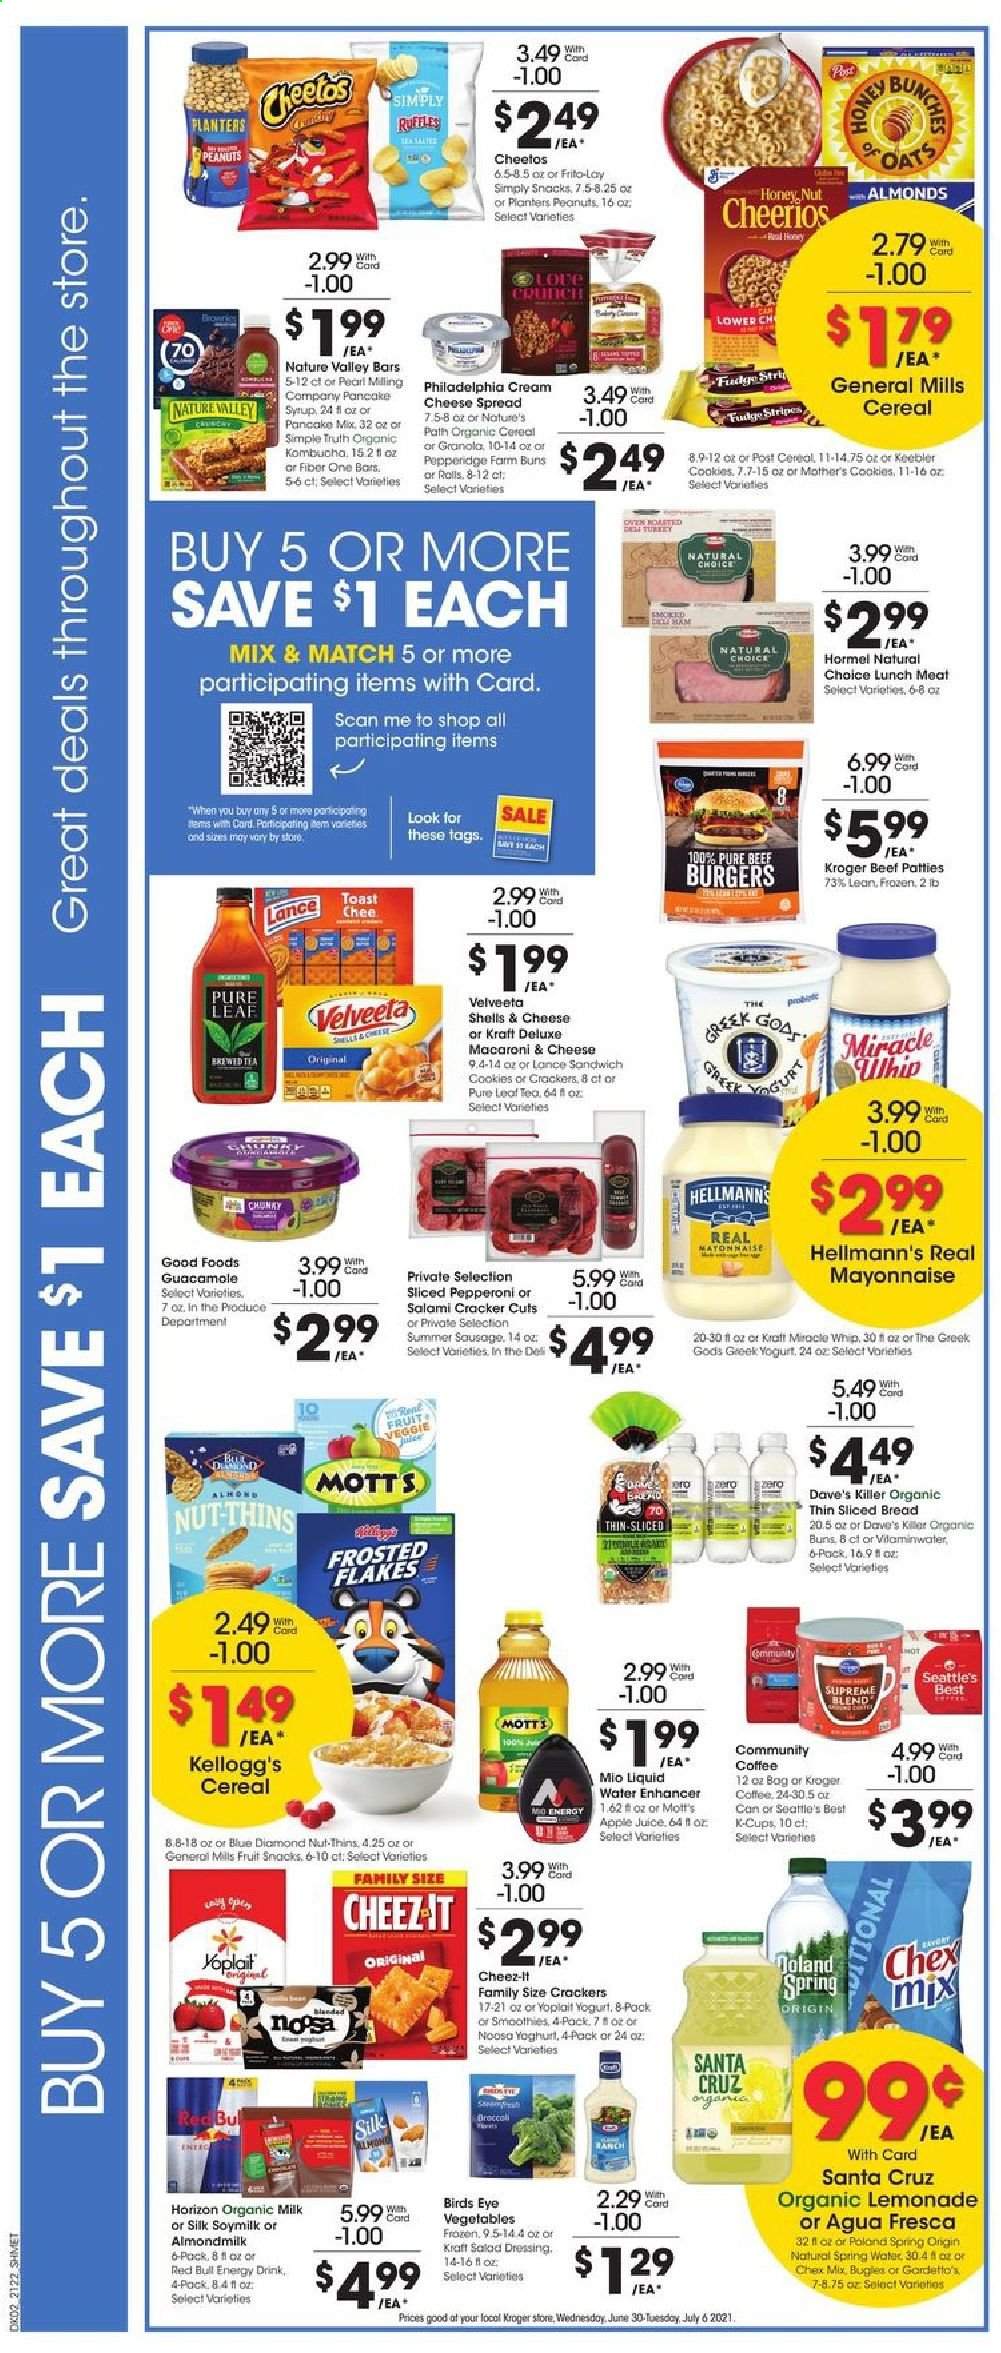 thumbnail - Kroger Flyer - 06/30/2021 - 07/06/2021 - Sales products - bread, buns, Mott's, macaroni & cheese, sandwich, hamburger, Bird's Eye, beef burger, Kraft®, Hormel, salami, sausage, summer sausage, pepperoni, cheese spread, guacamole, lunch meat, cream cheese, Philadelphia, yoghurt, Yoplait, almond milk, soy milk, organic milk, Silk, mayonnaise, Miracle Whip, Hellmann’s, cookies, fudge, crackers, Kellogg's, fruit snack, Keebler, Cheetos, Thins, Frito-Lay, Cheez-It, Chex Mix, oats, cereals, granola, Cheerios, Frosted Flakes, Nature Valley, Fiber One, dressing, pancake syrup, syrup, peanuts, Planters, Blue Diamond, apple juice, lemonade, juice, energy drink, Red Bull, spring water, kombucha, tea, Pure Leaf, coffee, coffee capsules, K-Cups. Page 3.